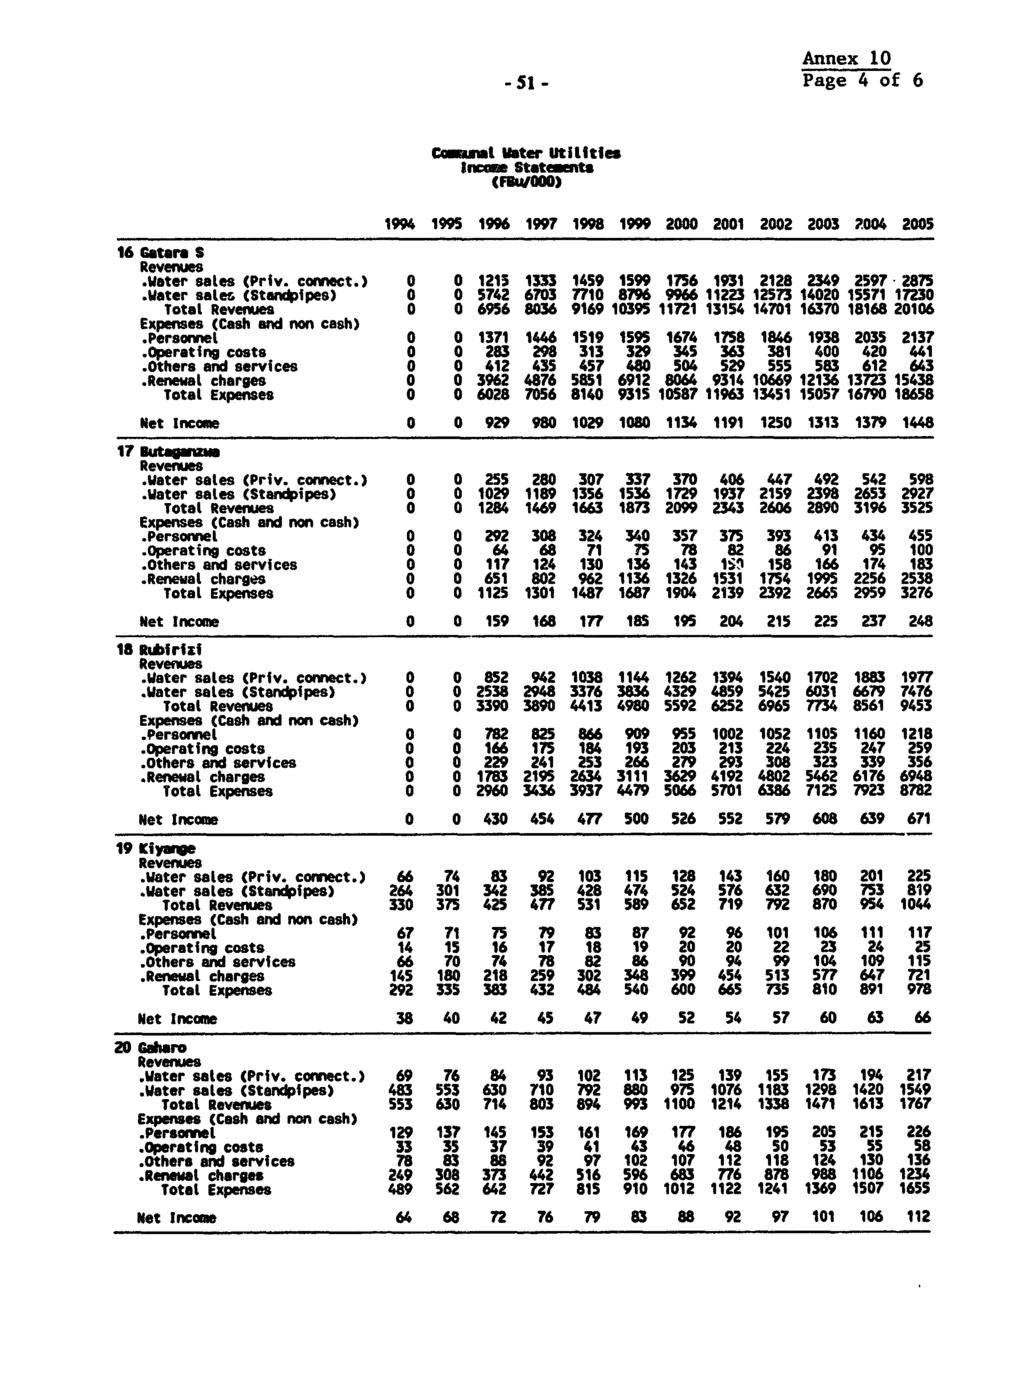 Annex 1-51 - Page 4 of 6 Ccanut Mater UtititIes Incoee Statemfts <FBWOOO) 1994 1995 1996 1997 1998 1999 2 21 22 23 24 25 16 Gâtera S Revenues.Water sales (Priv. comect.